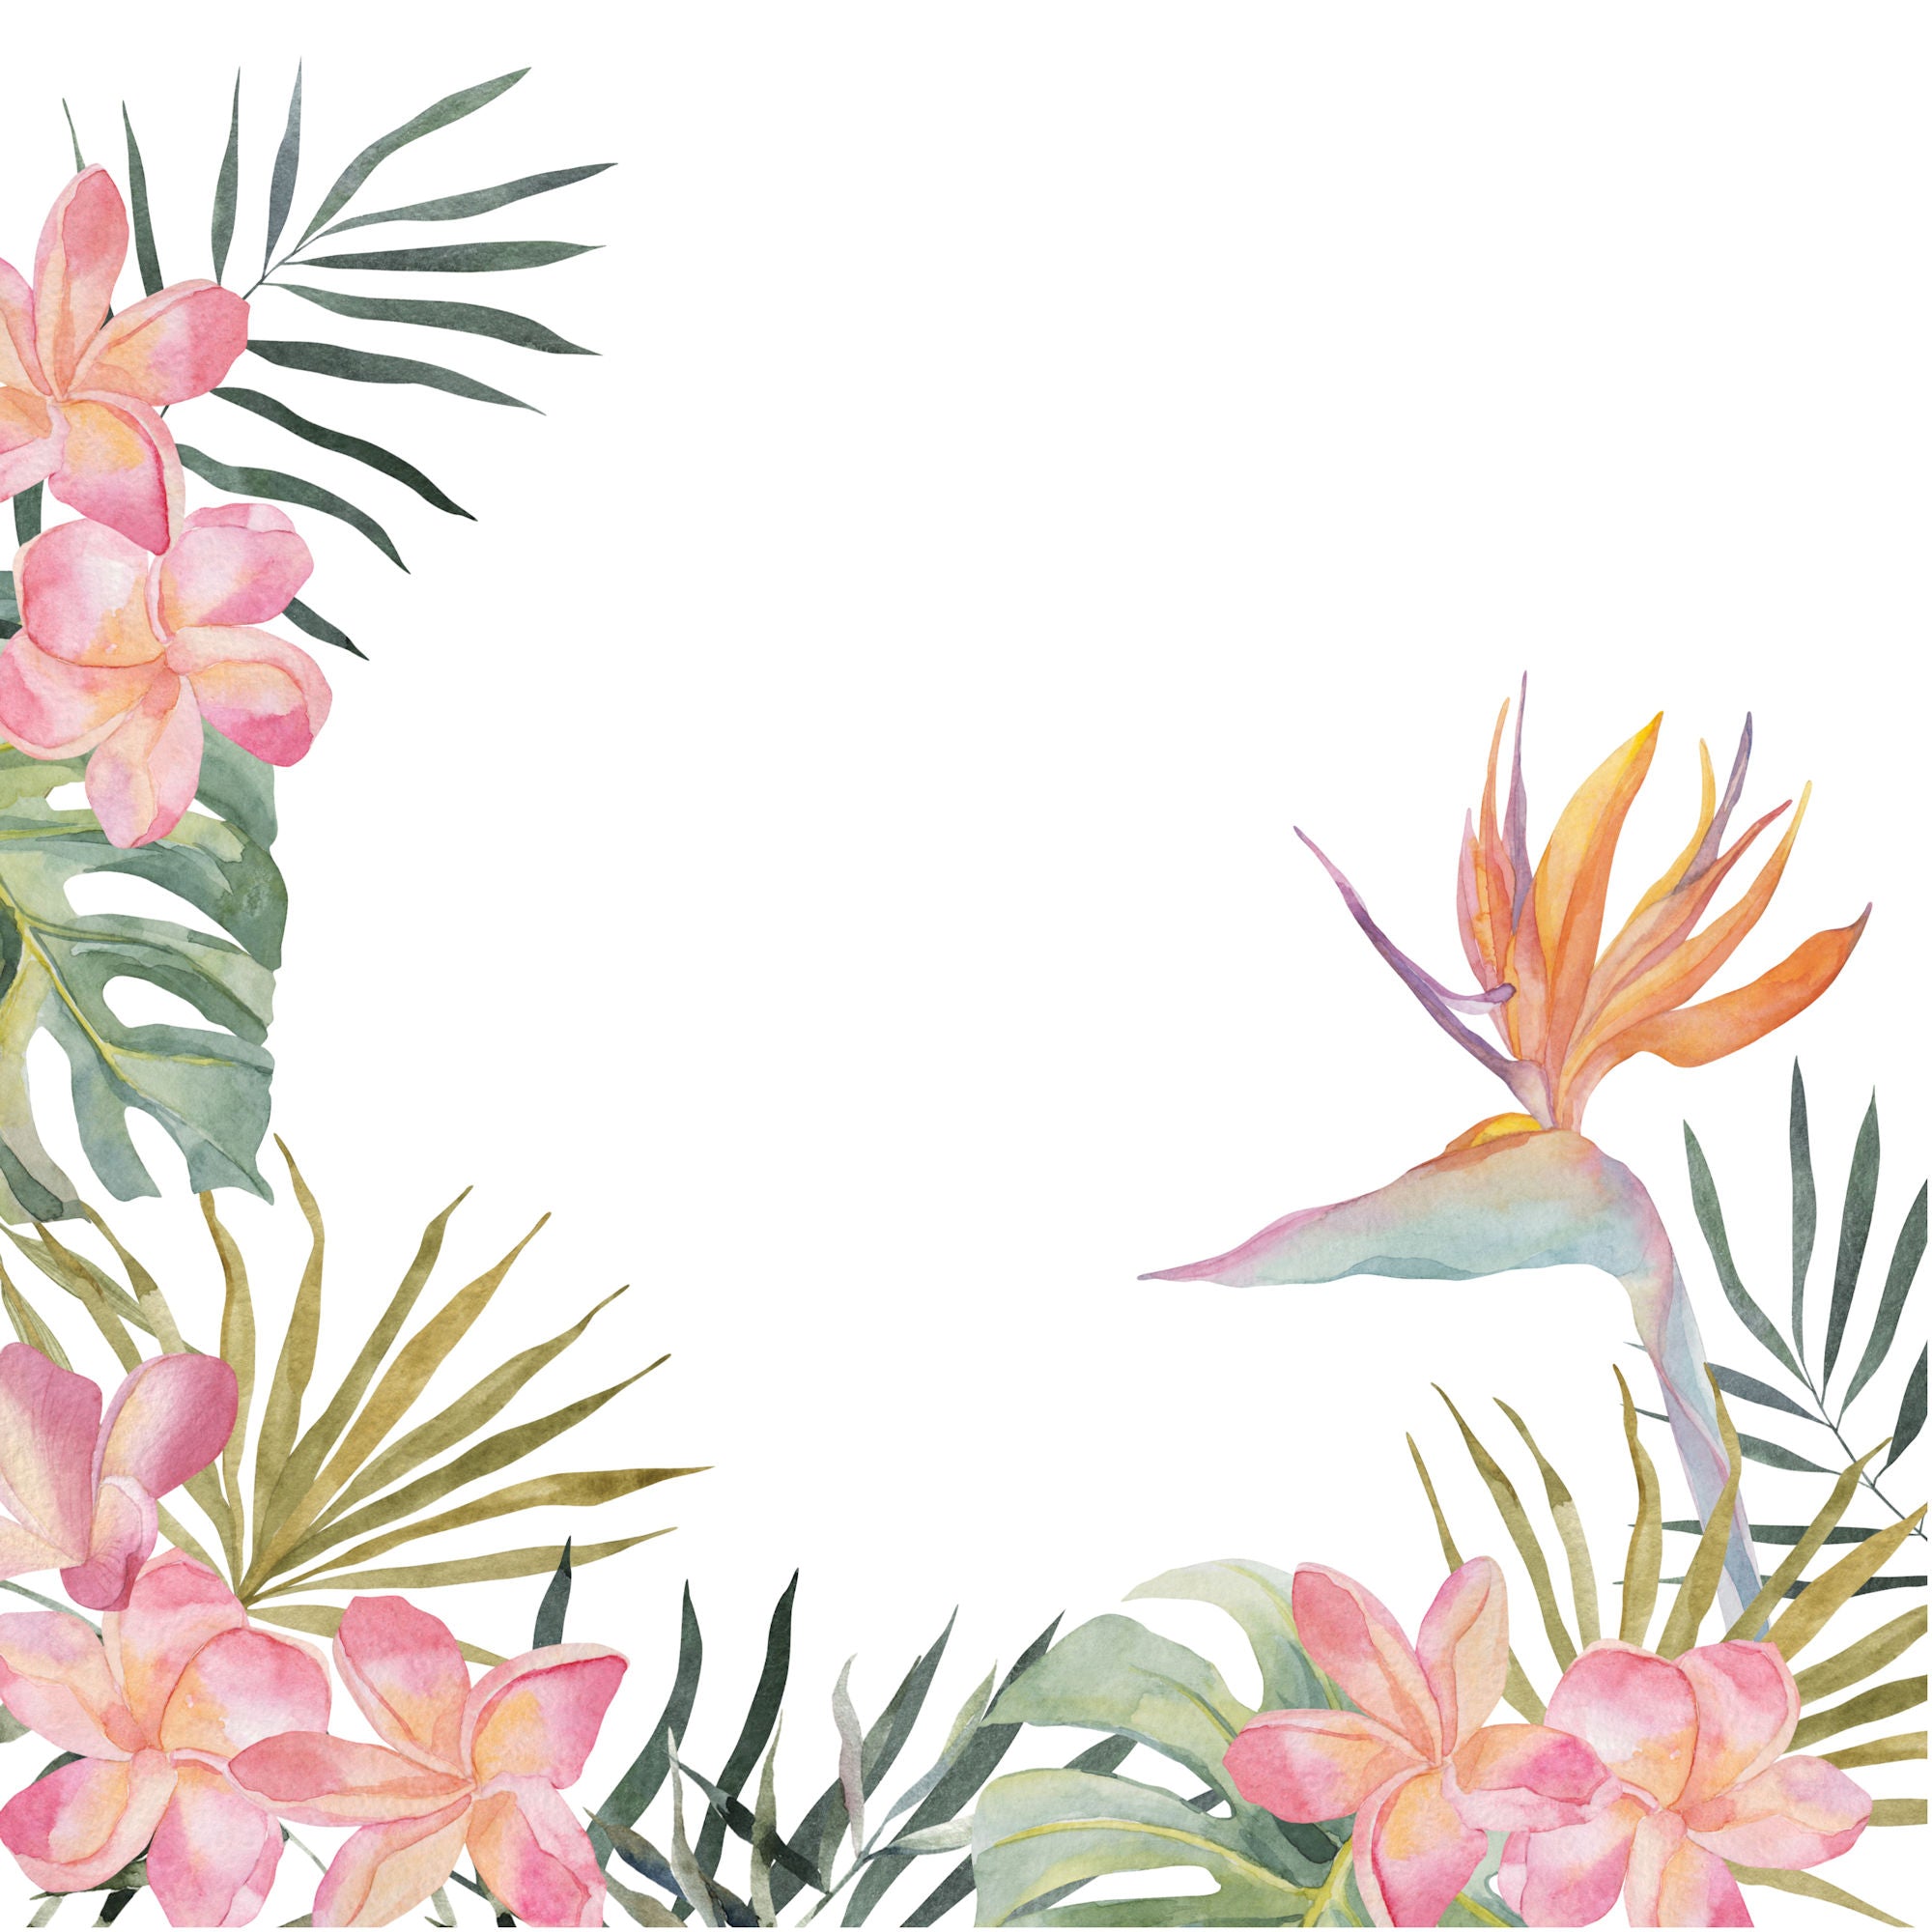 Tropical Paradise Collection Exquisite 12 x 12 Double-Sided Scrapbook Paper by SSC Designs